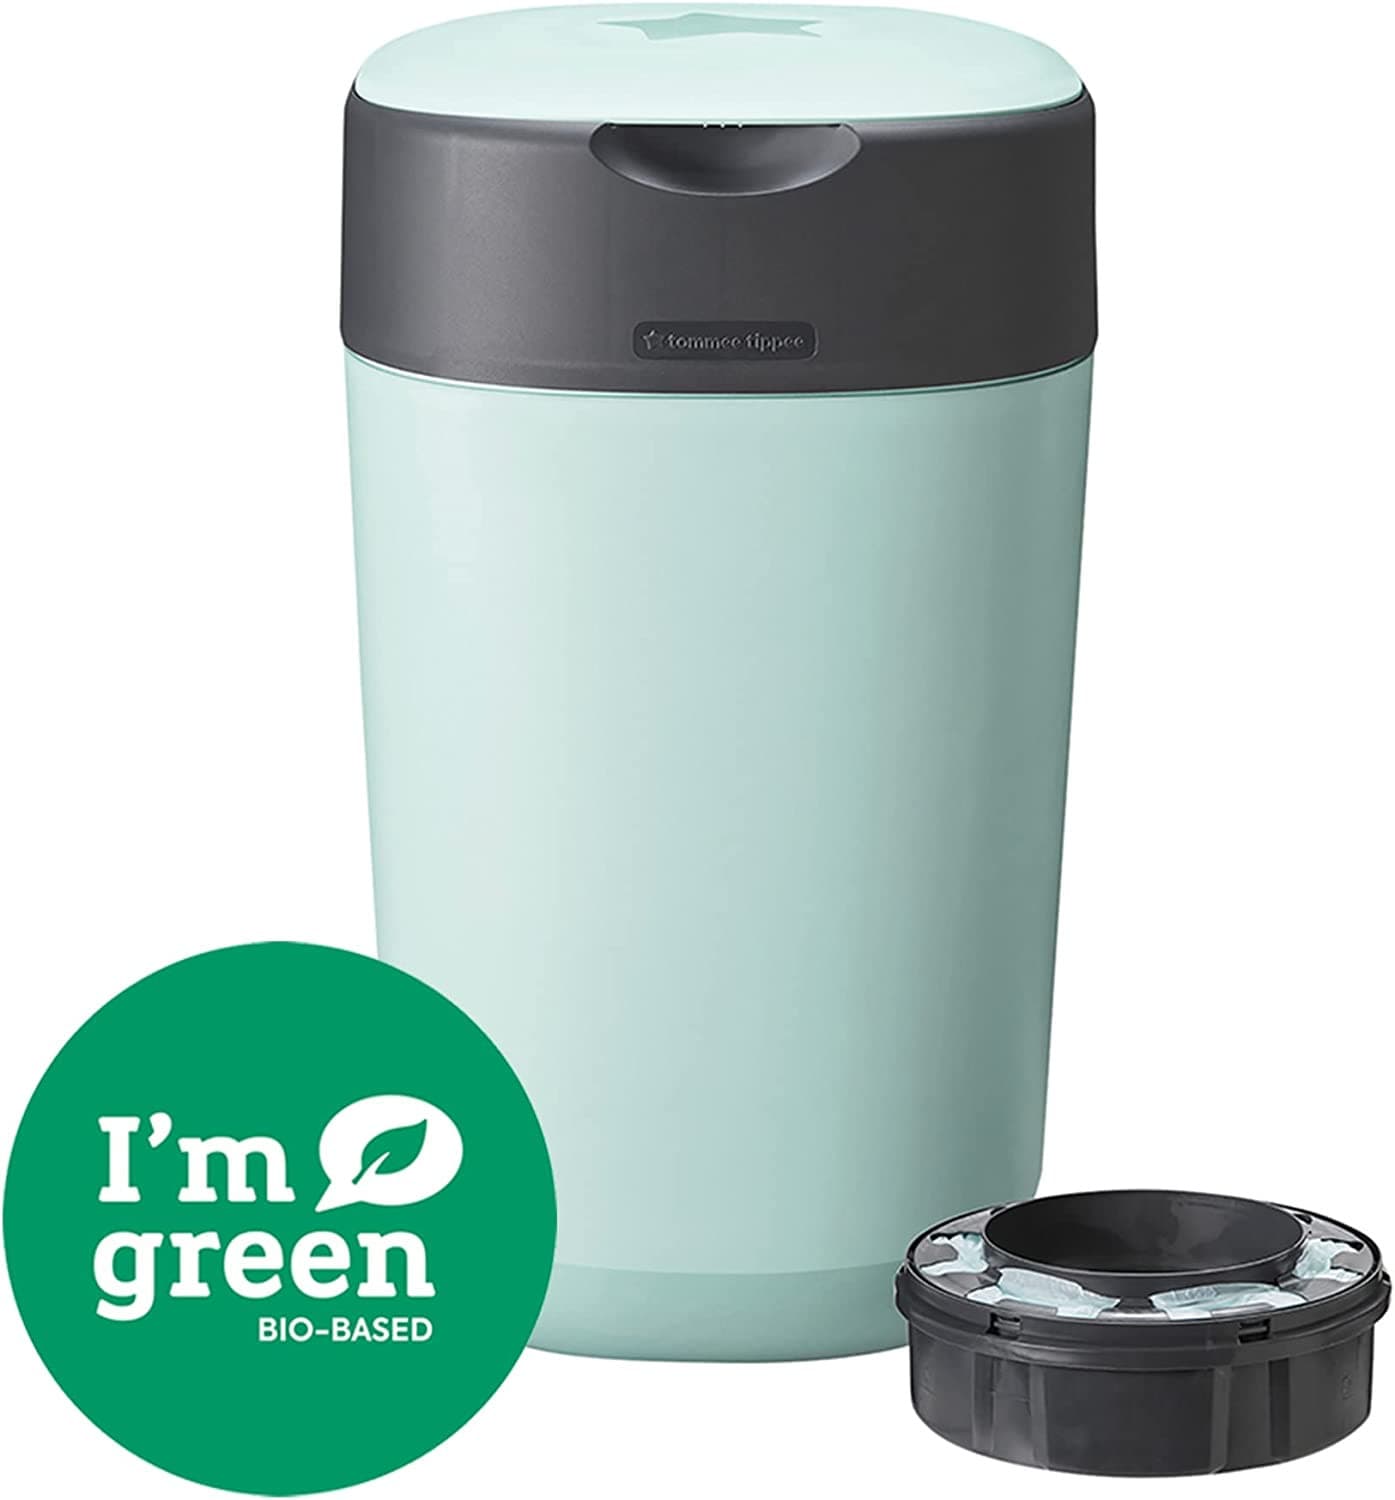 Tommee Tippee Twist and Click Advanced Nappy Bin, Eco-Friendlier System, Includes 1x Refill Cassette with Sustainably Sourced Antibacterial GREENFILM, Green.